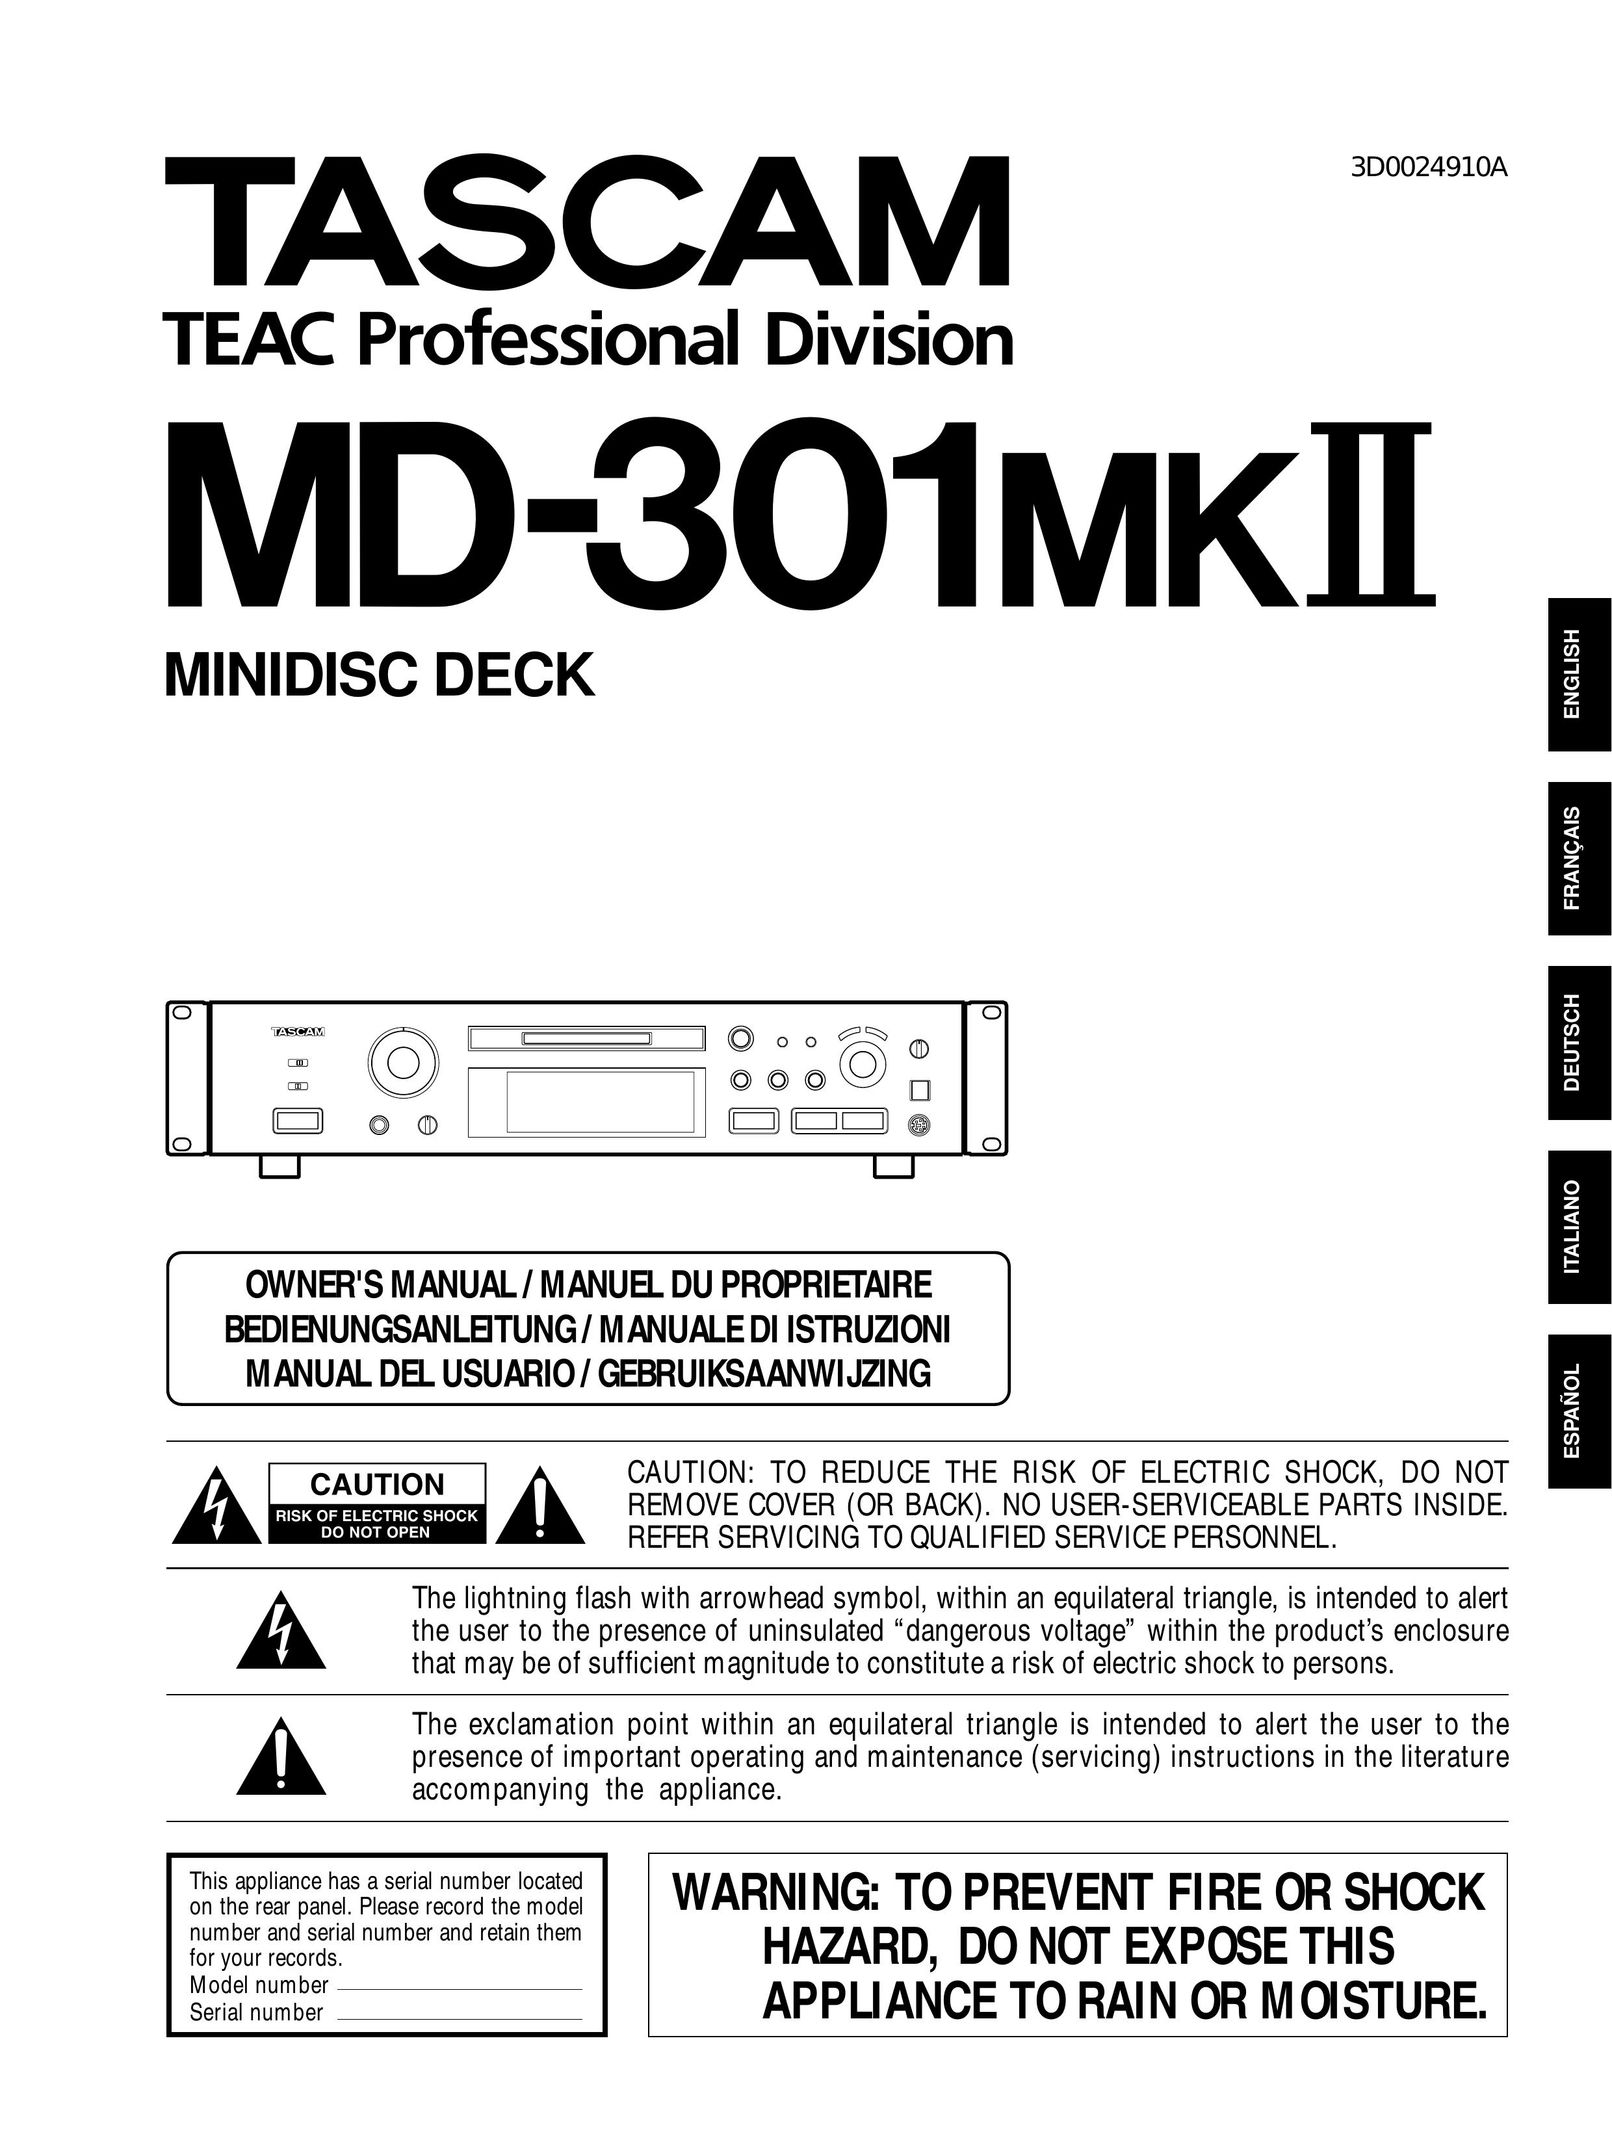 Tascam MD-301mkII Car Stereo System User Manual